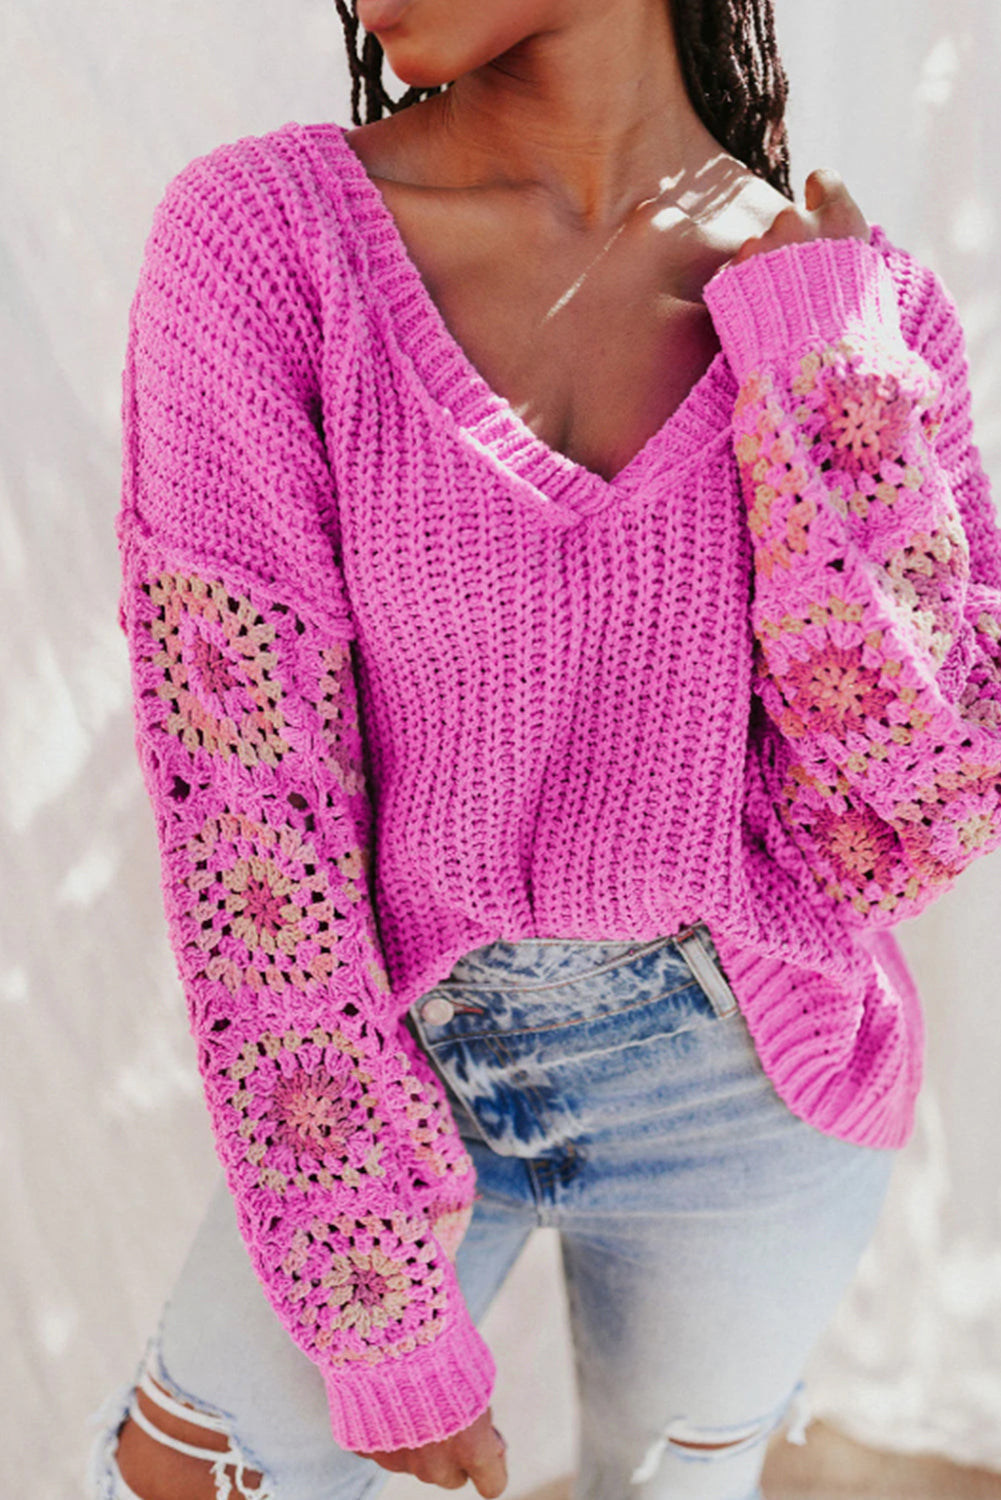 Rose Floral Crochet Cable Knit V Neck Sweater